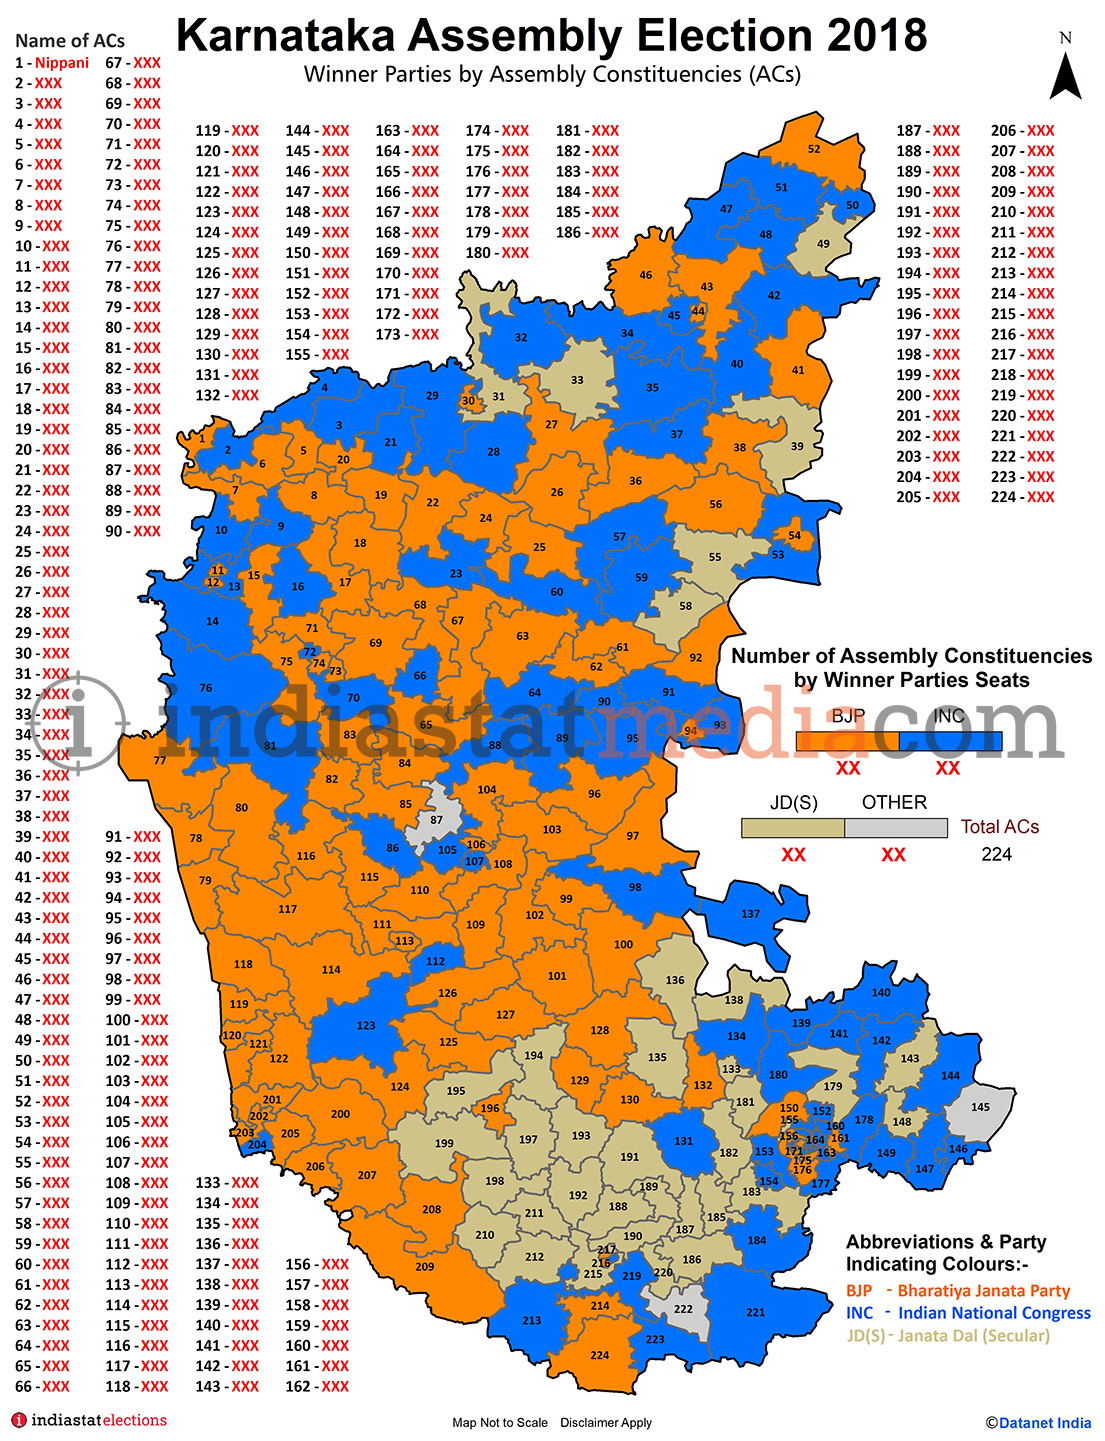 Winner Parties by Assembly Constituencies in Karnataka (Assembly Election - 2018)